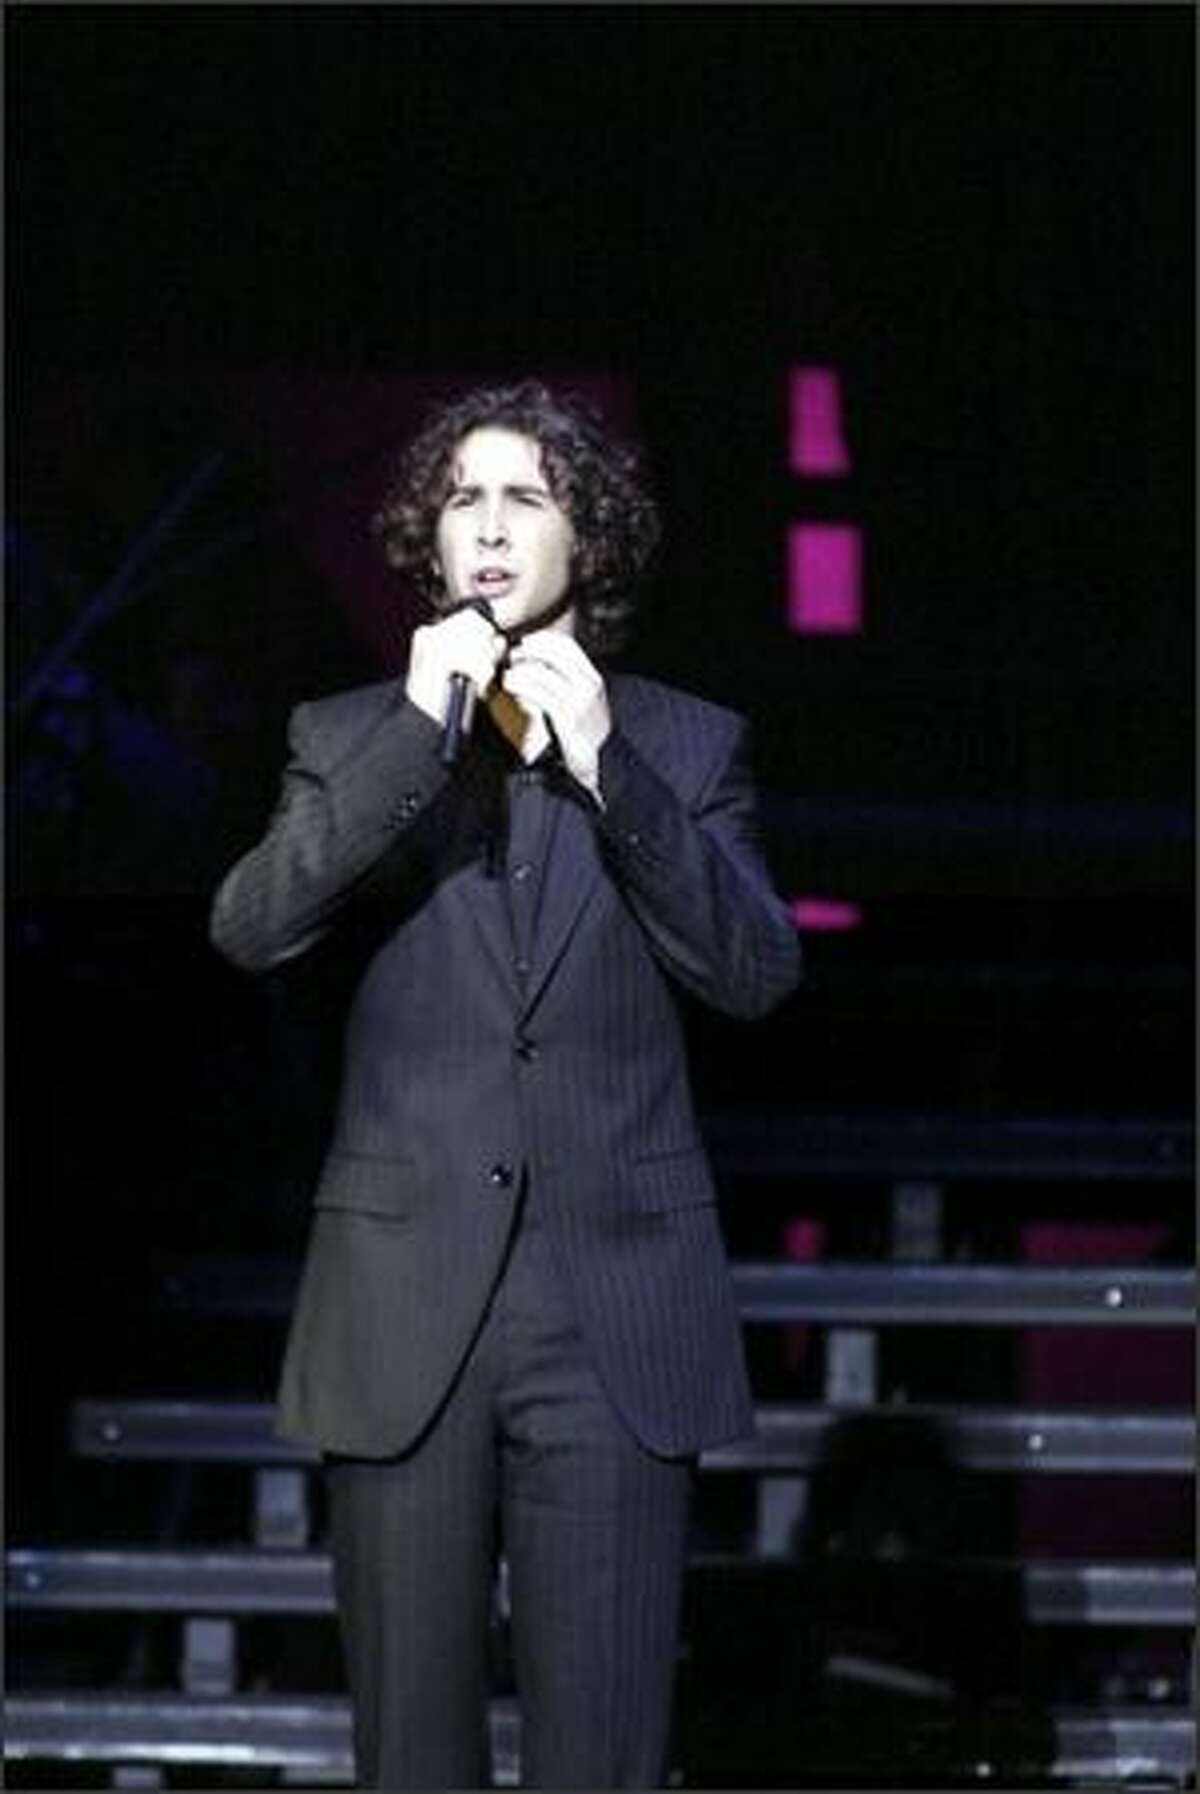 Pop singer Josh Groban sings to a sold out crowd at the Paramount Saturday night in Seattle. It only took 30 minutes to sell out all 130,000 seats in his first-ever 40-city nationwide tour.